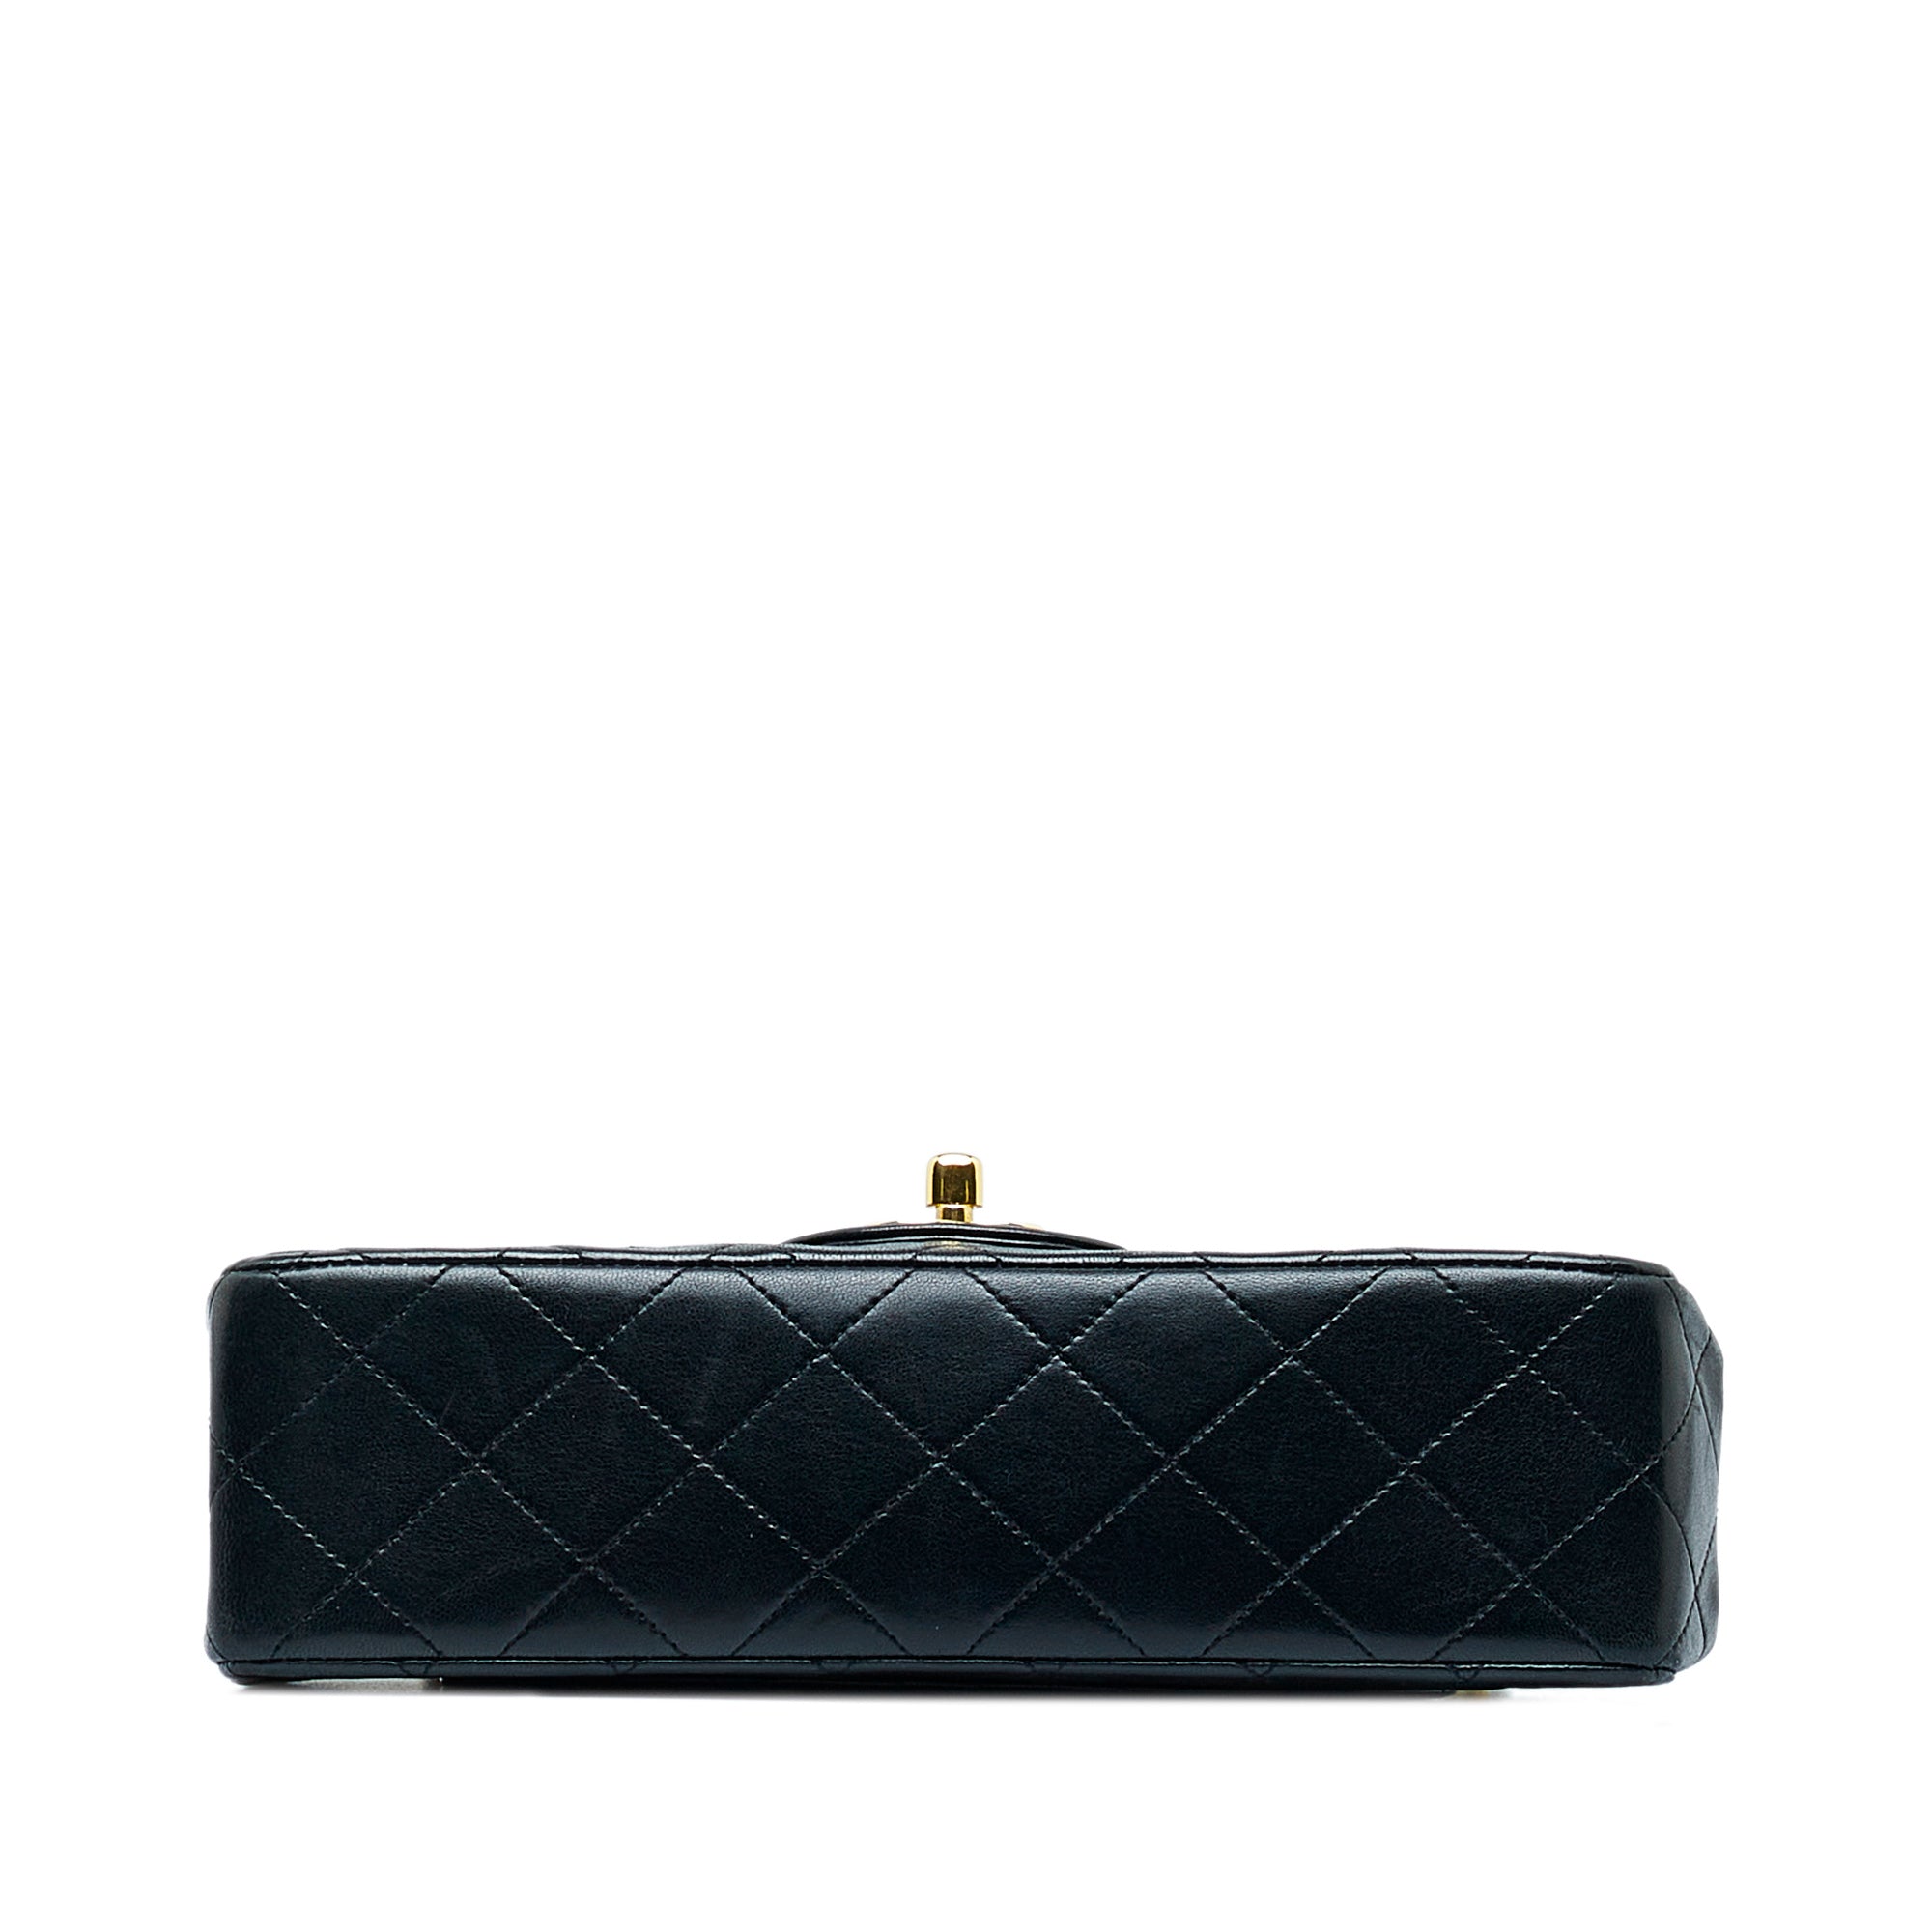 RvceShops Revival, Black Chanel Classic Small Lambskin Double Flap Bag